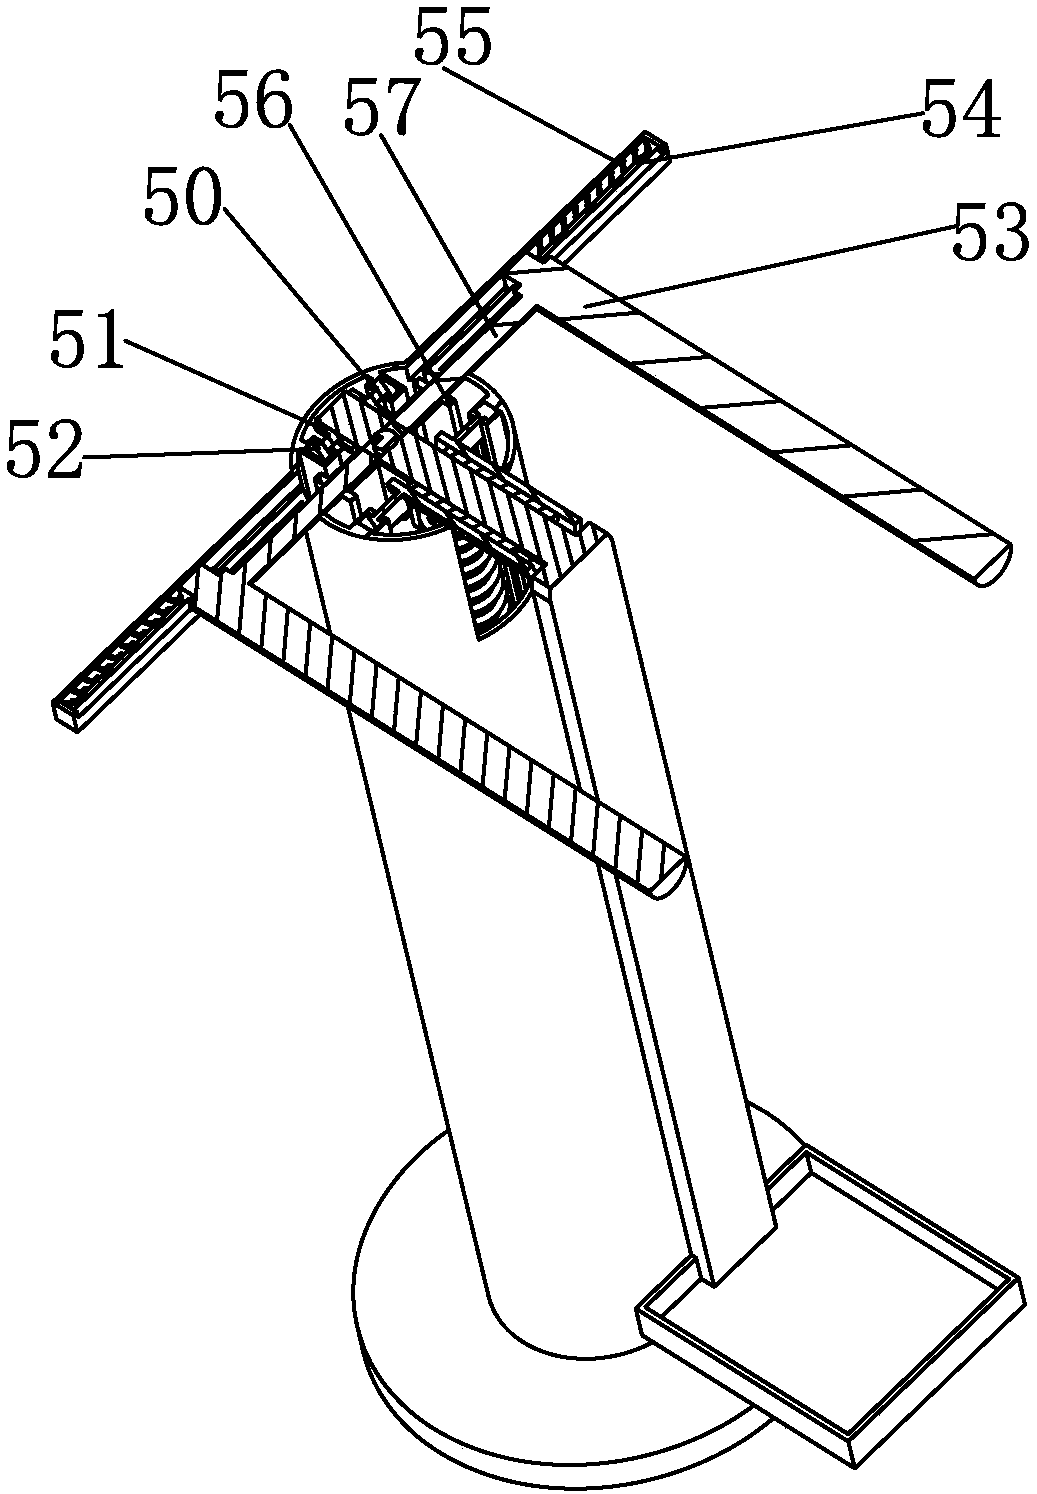 Swinging board with double-safety device